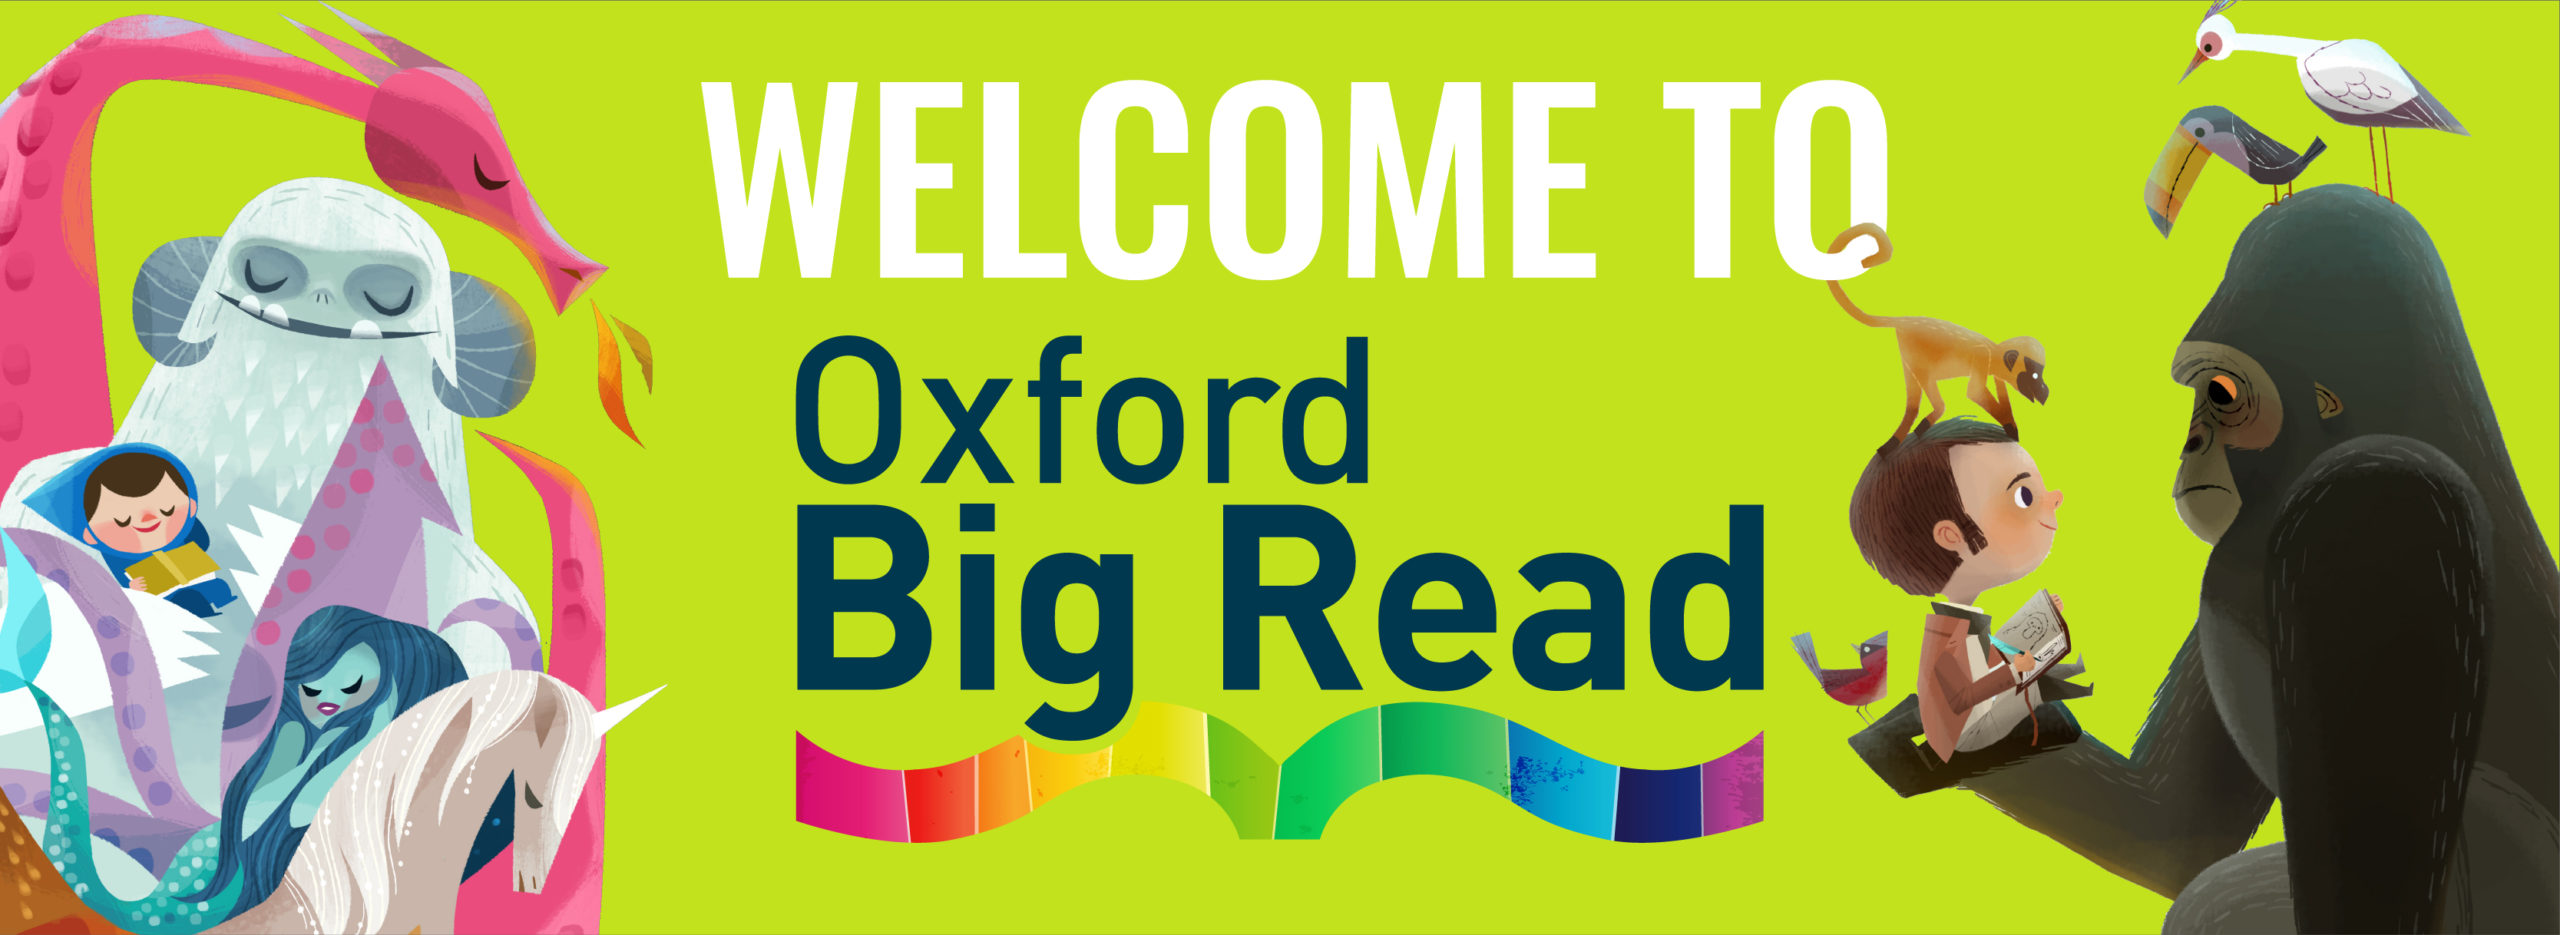 Oxford Big Read Global Welcome Banner